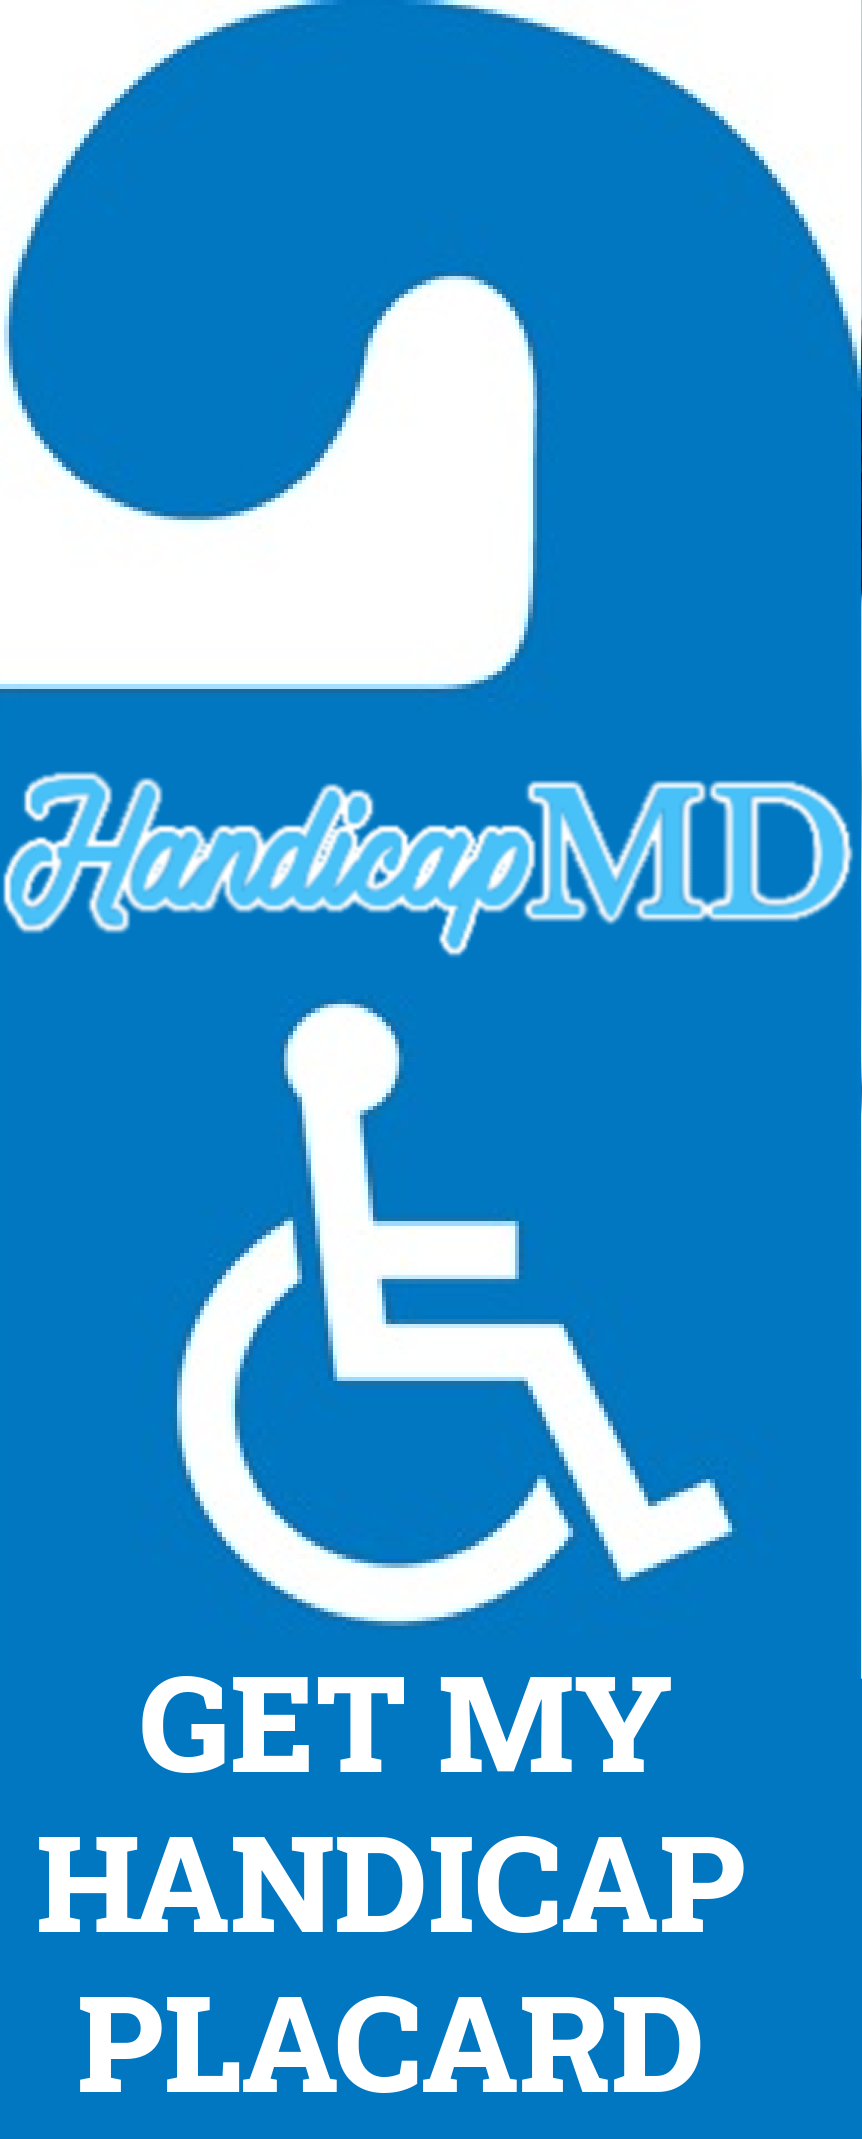 Handicap Placard Violations and Penalties in Anchorage AK: What You Need to Know